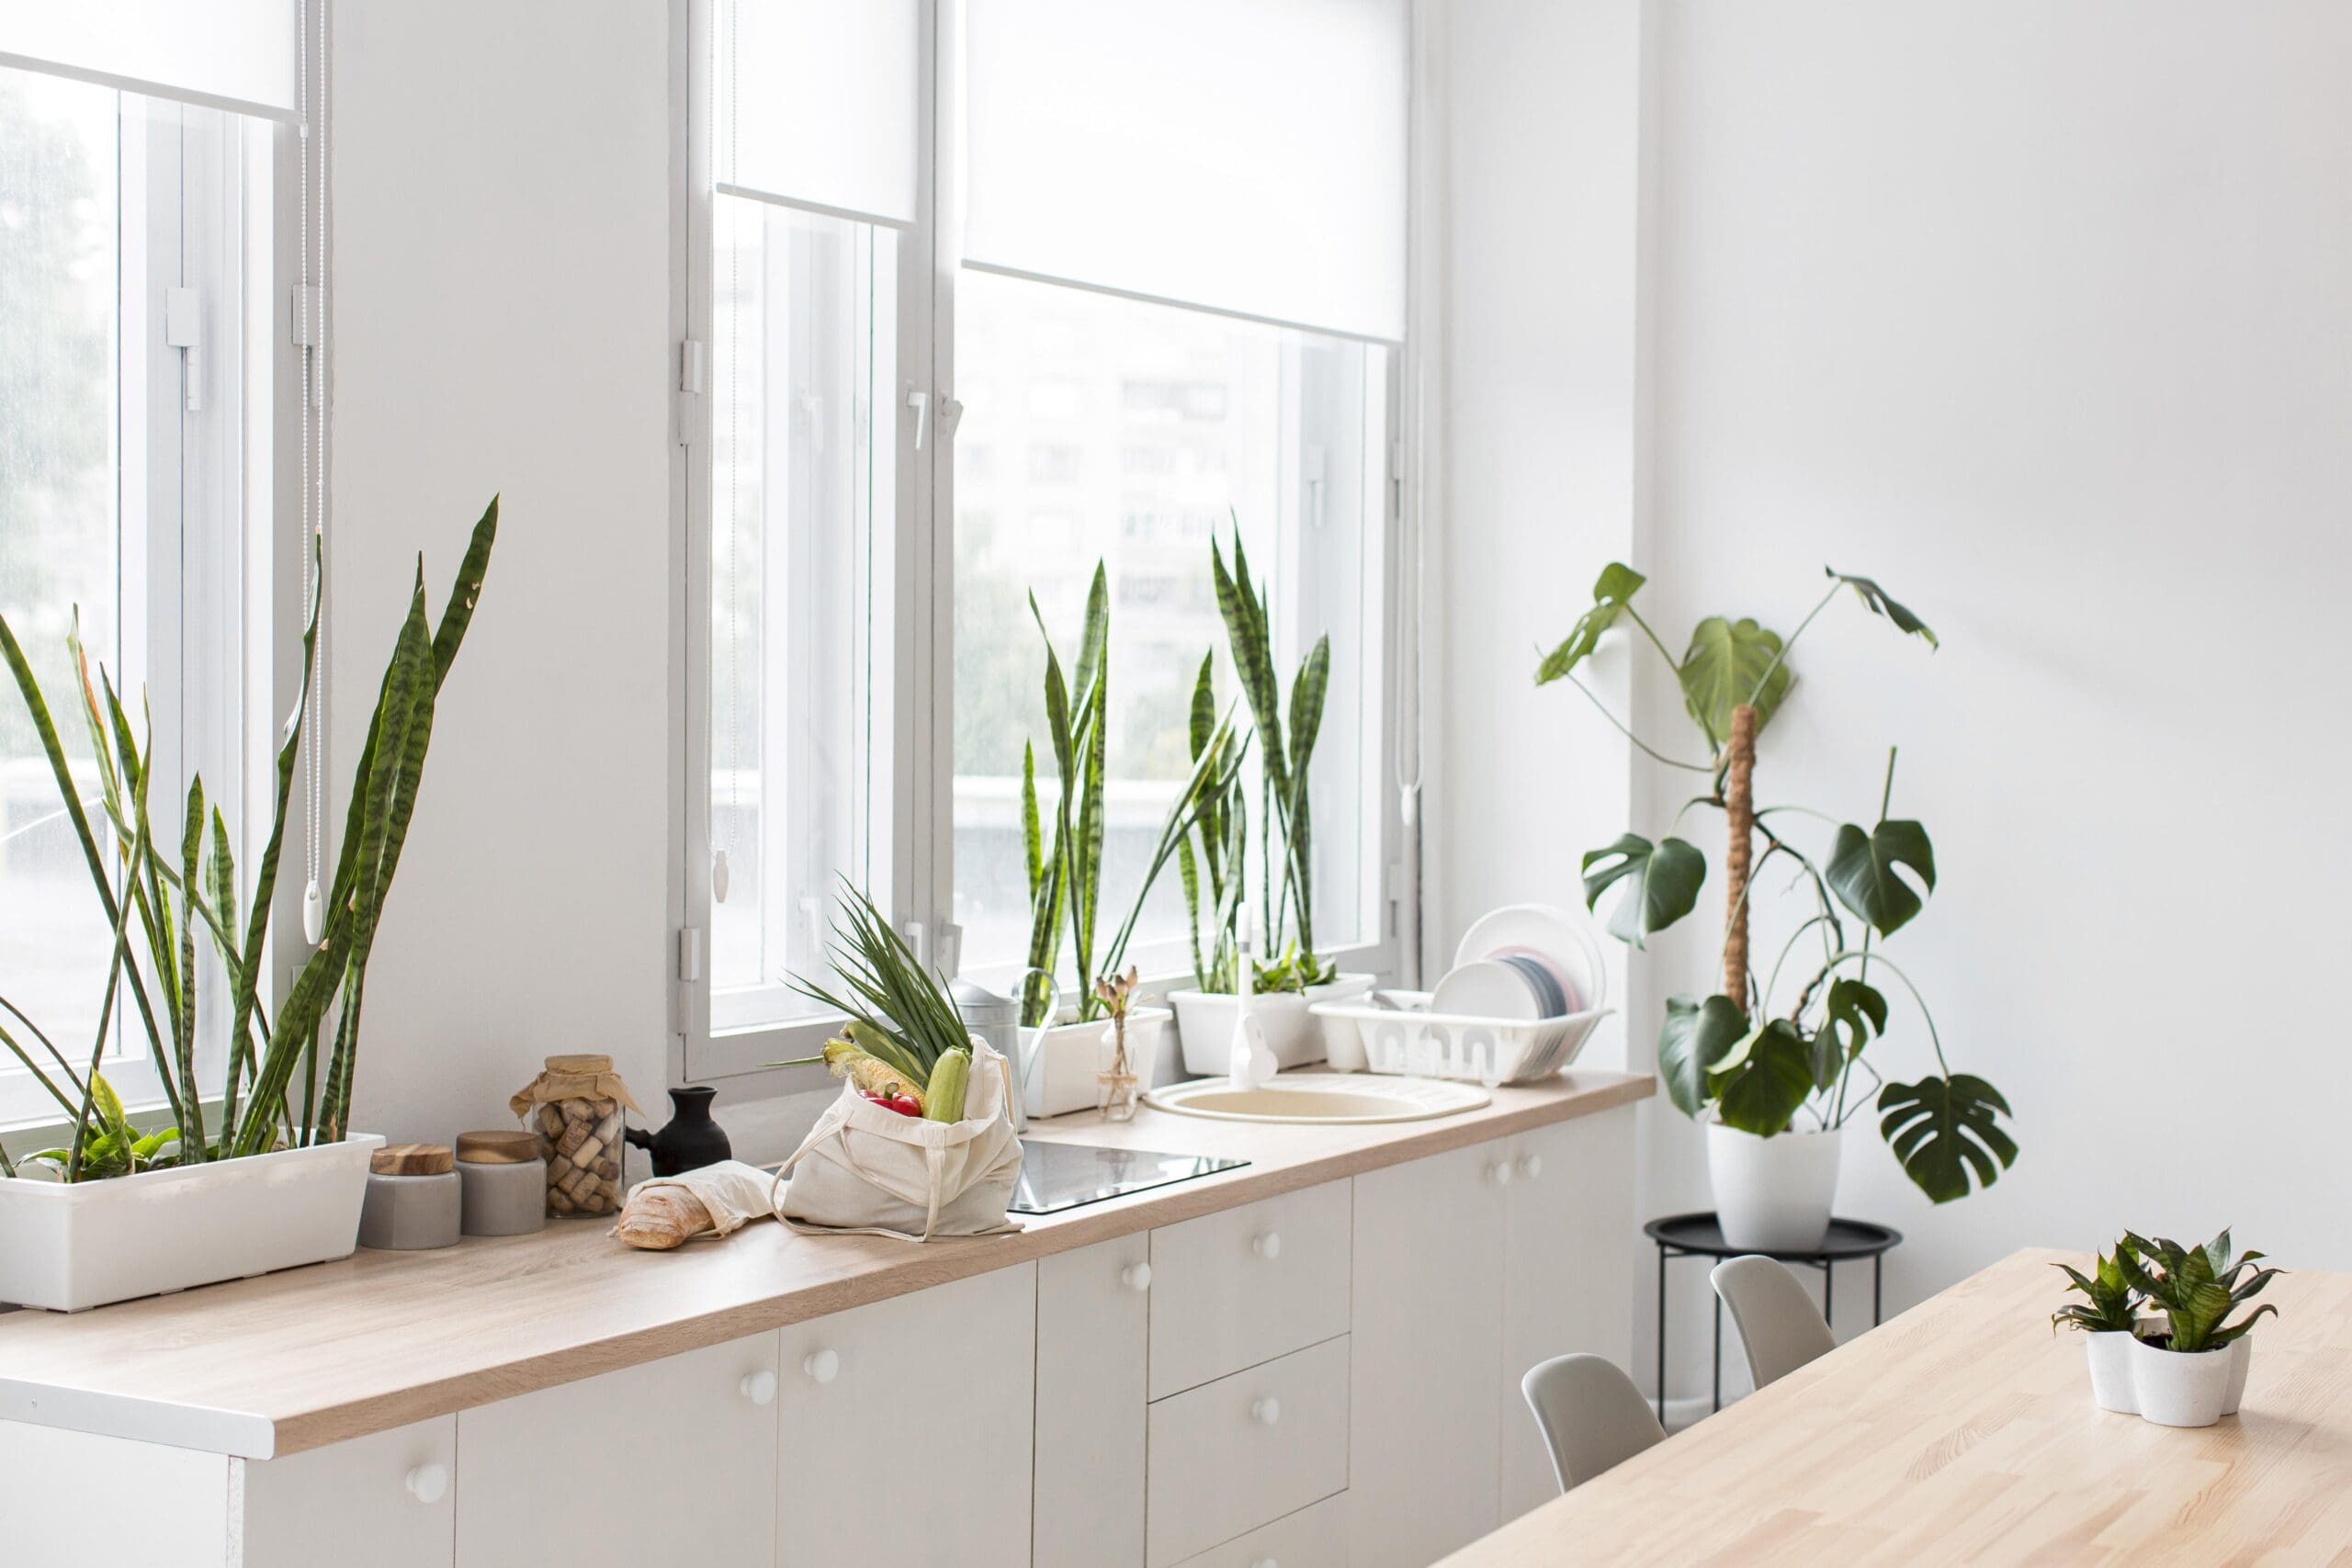 modern kitchen with plants as decor